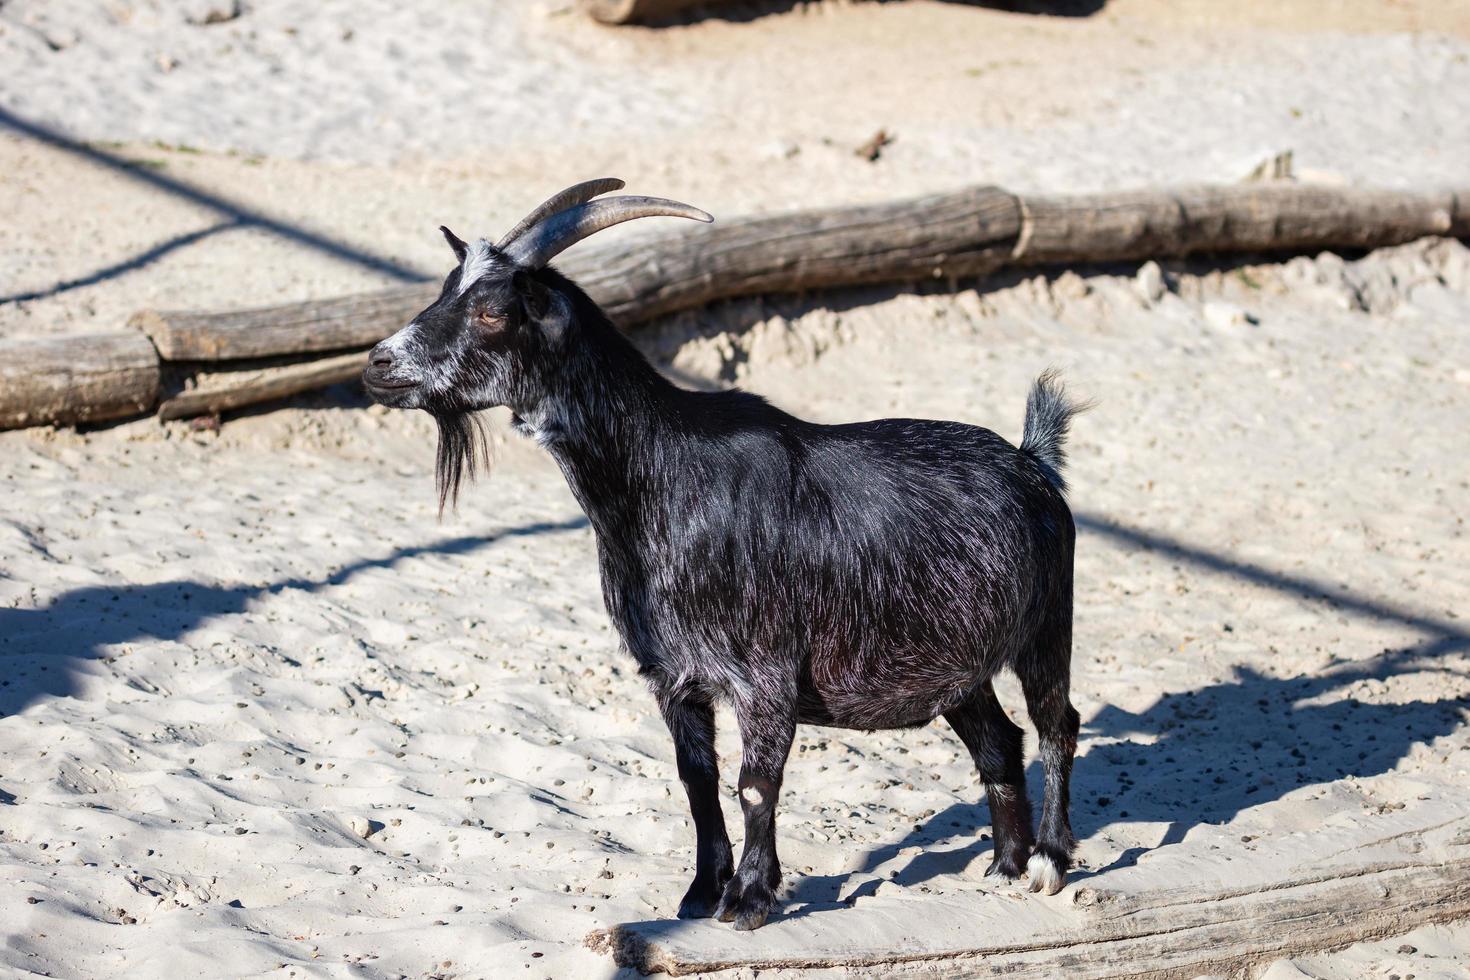 West African pygmy goat. Mammal and mammals. Land world and fauna. Wildlife and zoology. photo